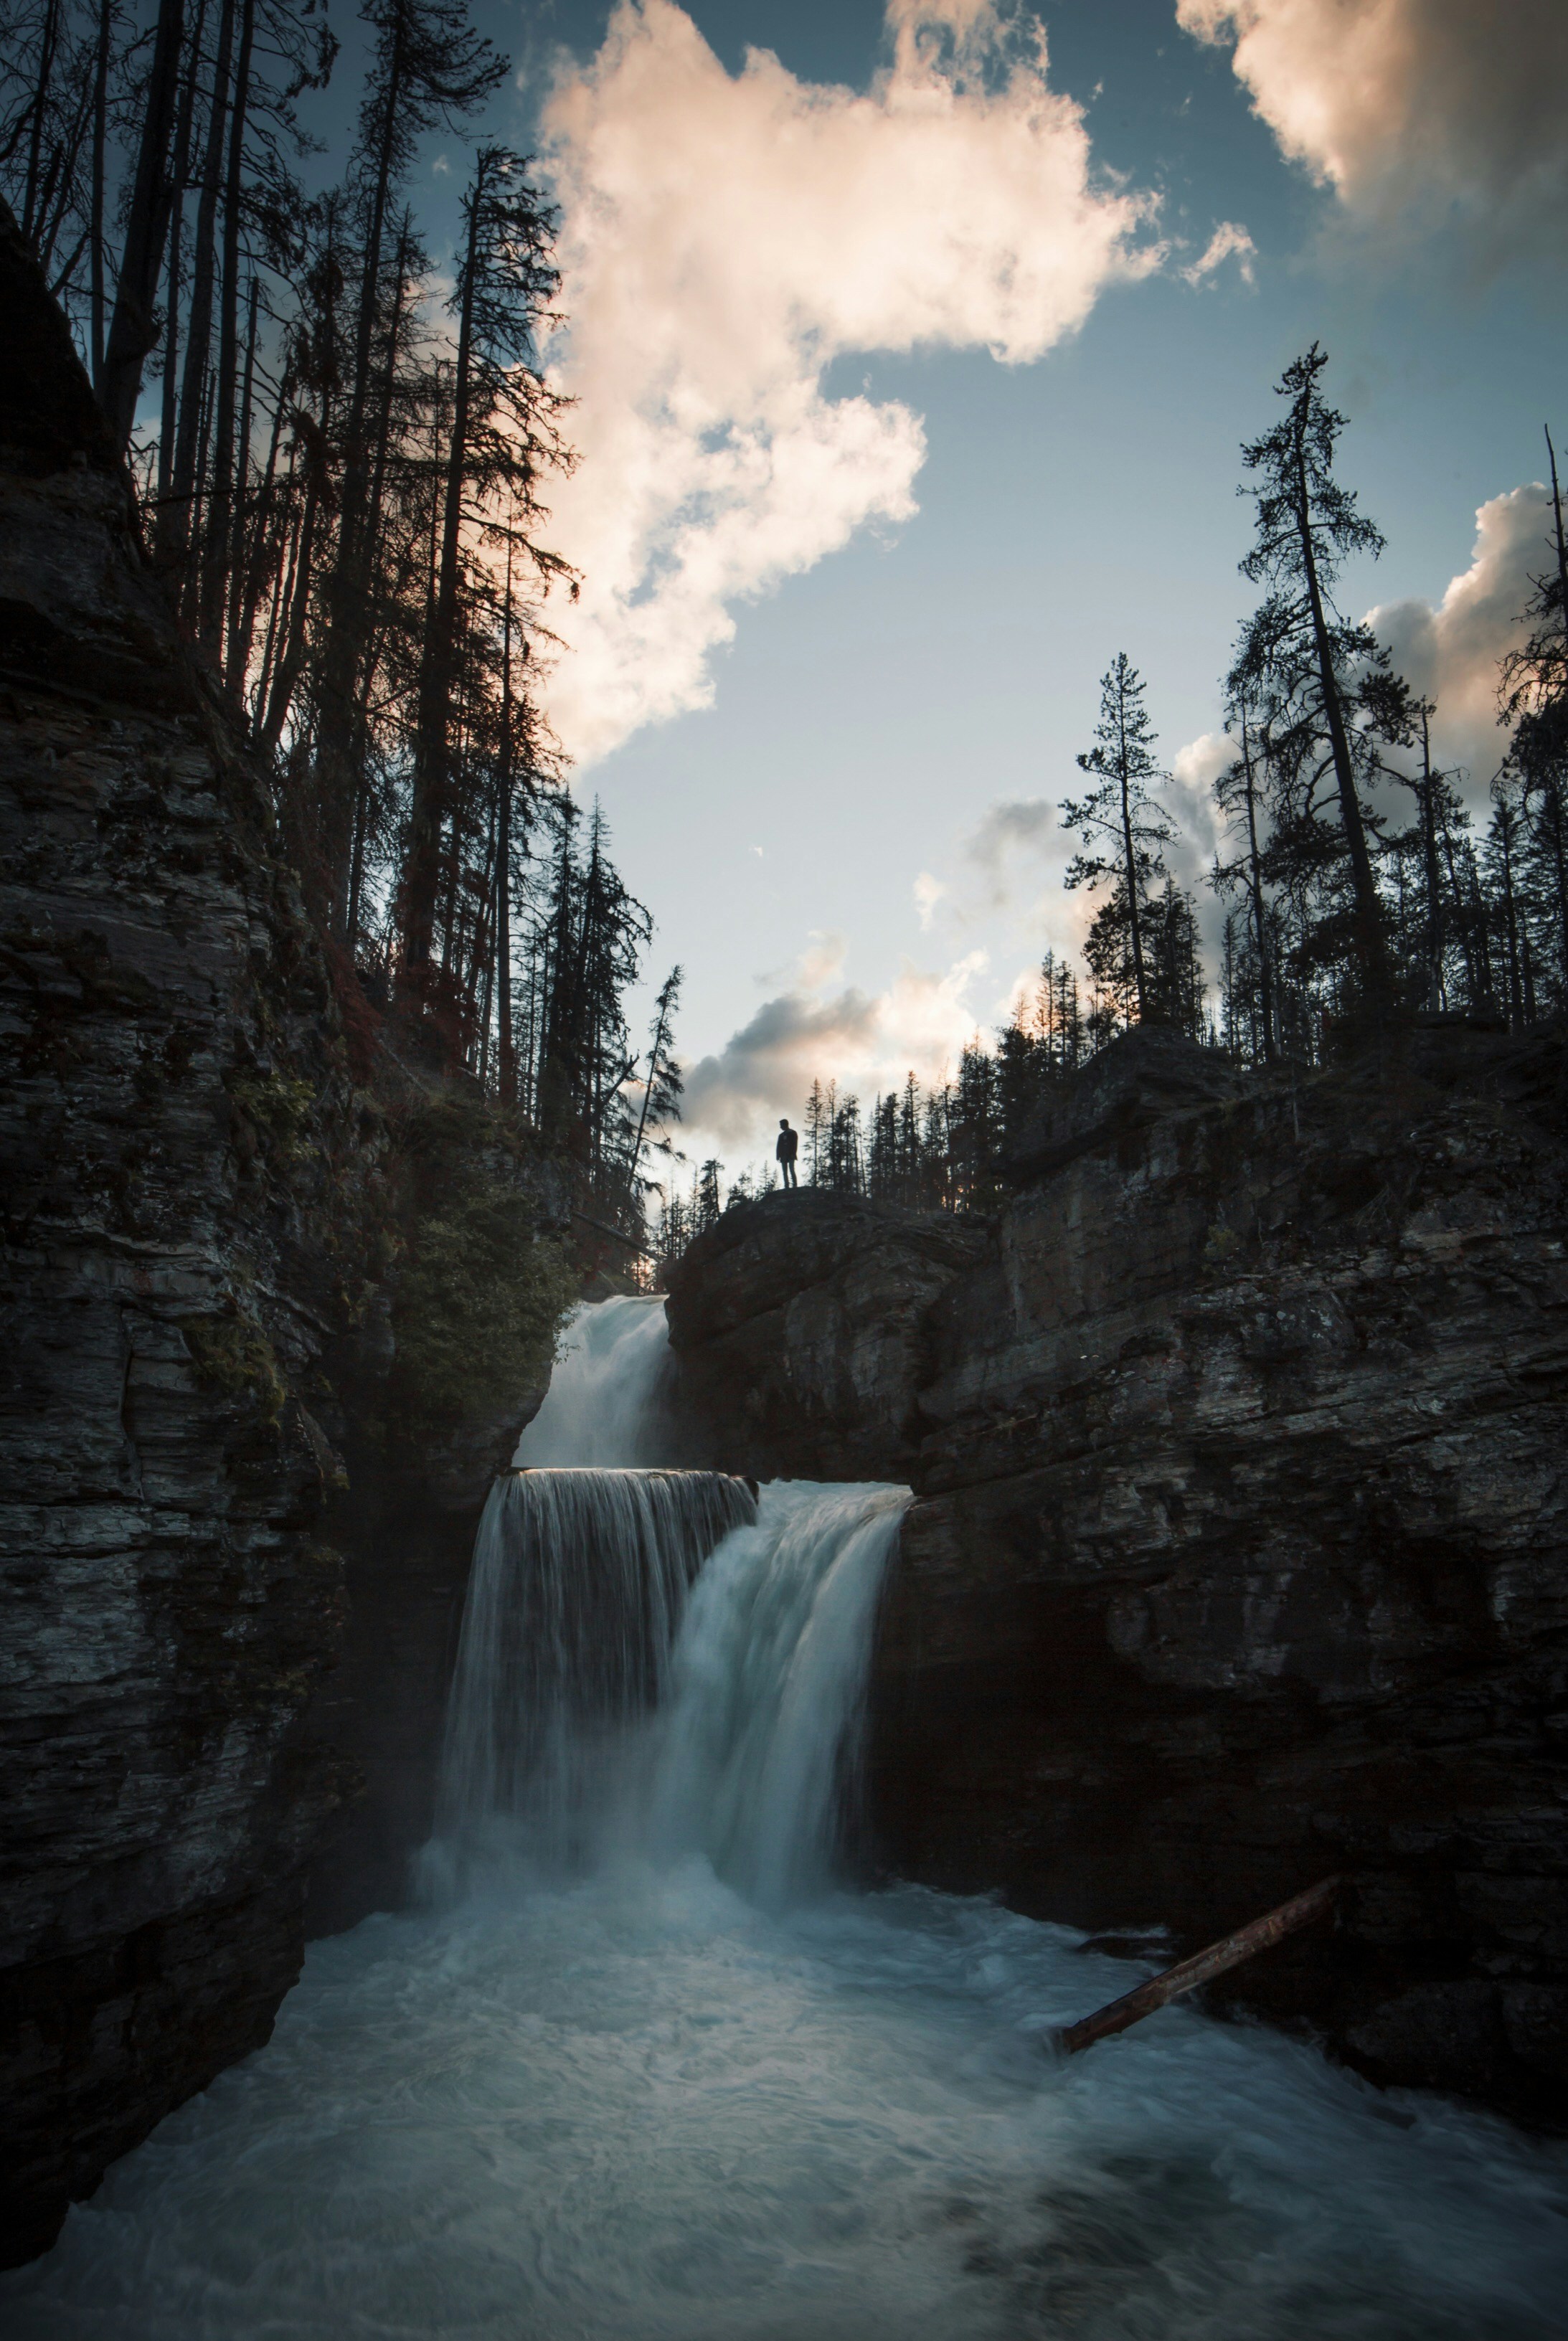 @Keananbrown and @Josiahwg went adventuring in Glacier National Parks on the St. Mary Falls hike during the summer of 2016 and stopped at one of the water falls along the hike to enjoy the view. Photo by @Josiahwg